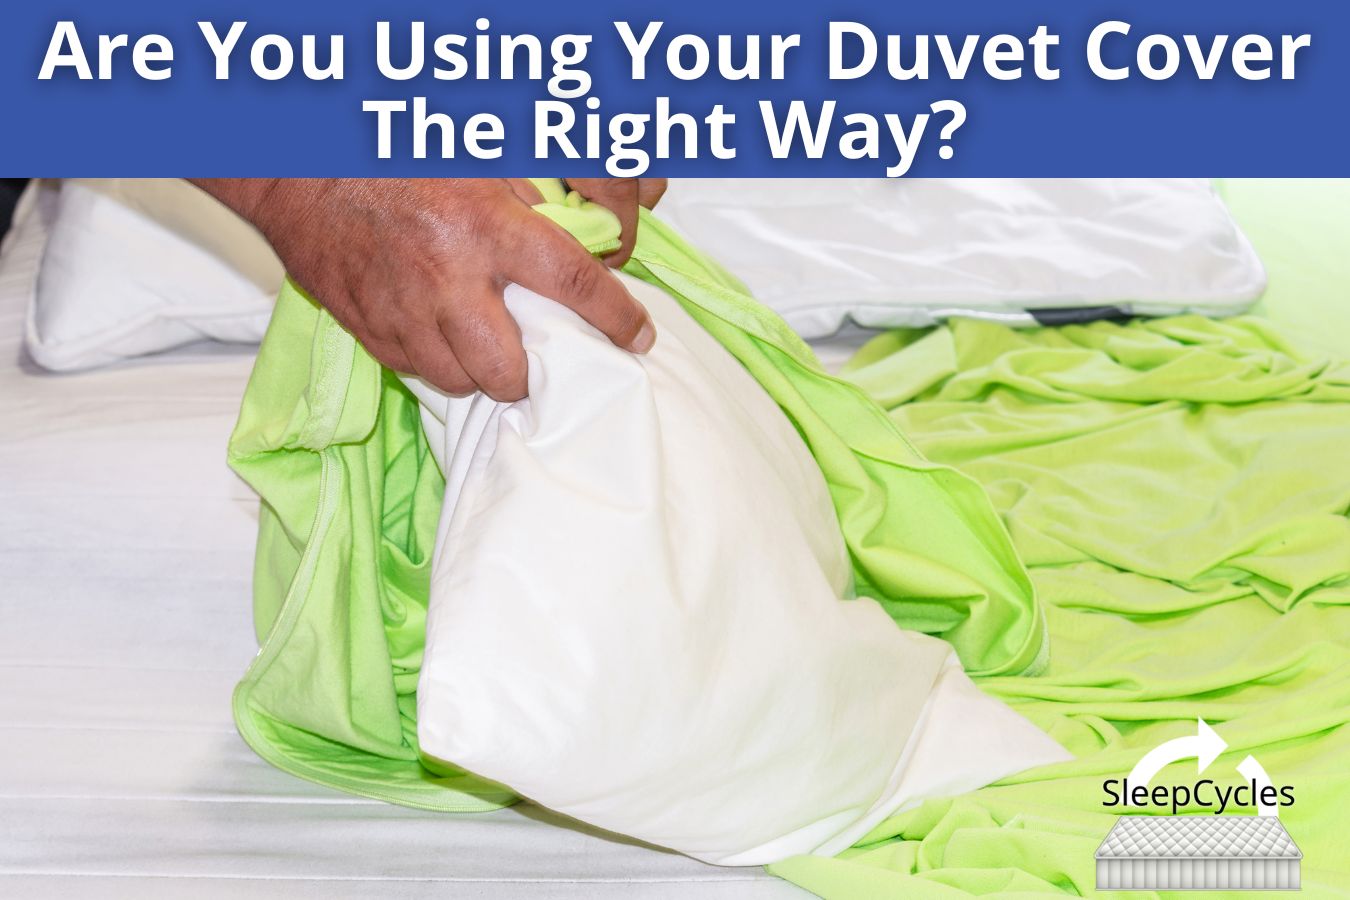 Are You Using Your Duvet Cover The Right Way